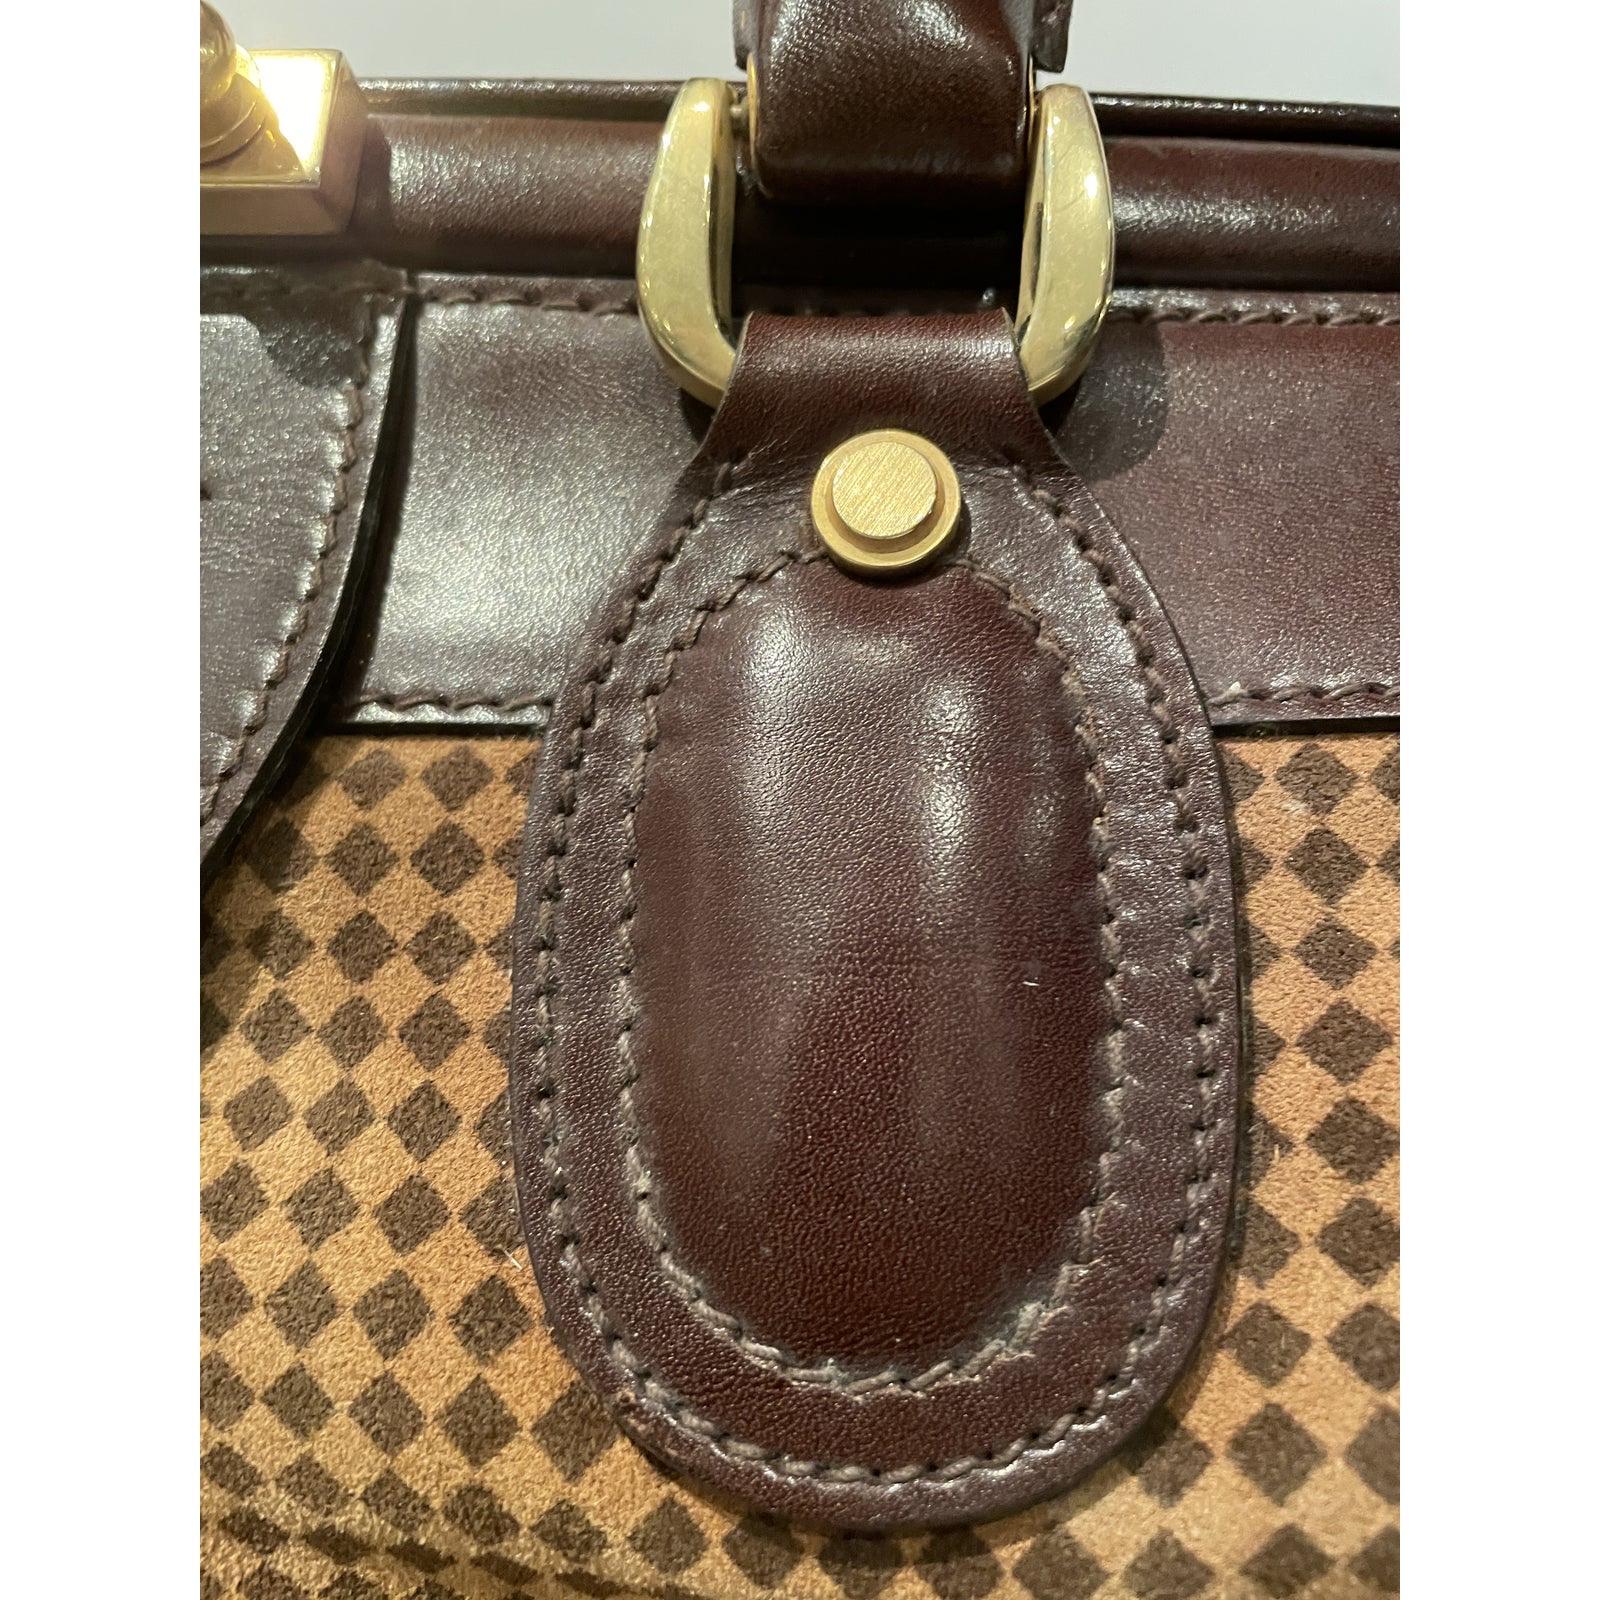 Vintage luxurious men’s weekender bag by Bottega Venetta. Constructed of a deep chocolate brown leather and Italian suede, this is the perfect bag for weekends. The suede is caramel in color with a brown diamond shaped design. The hardware is chunky